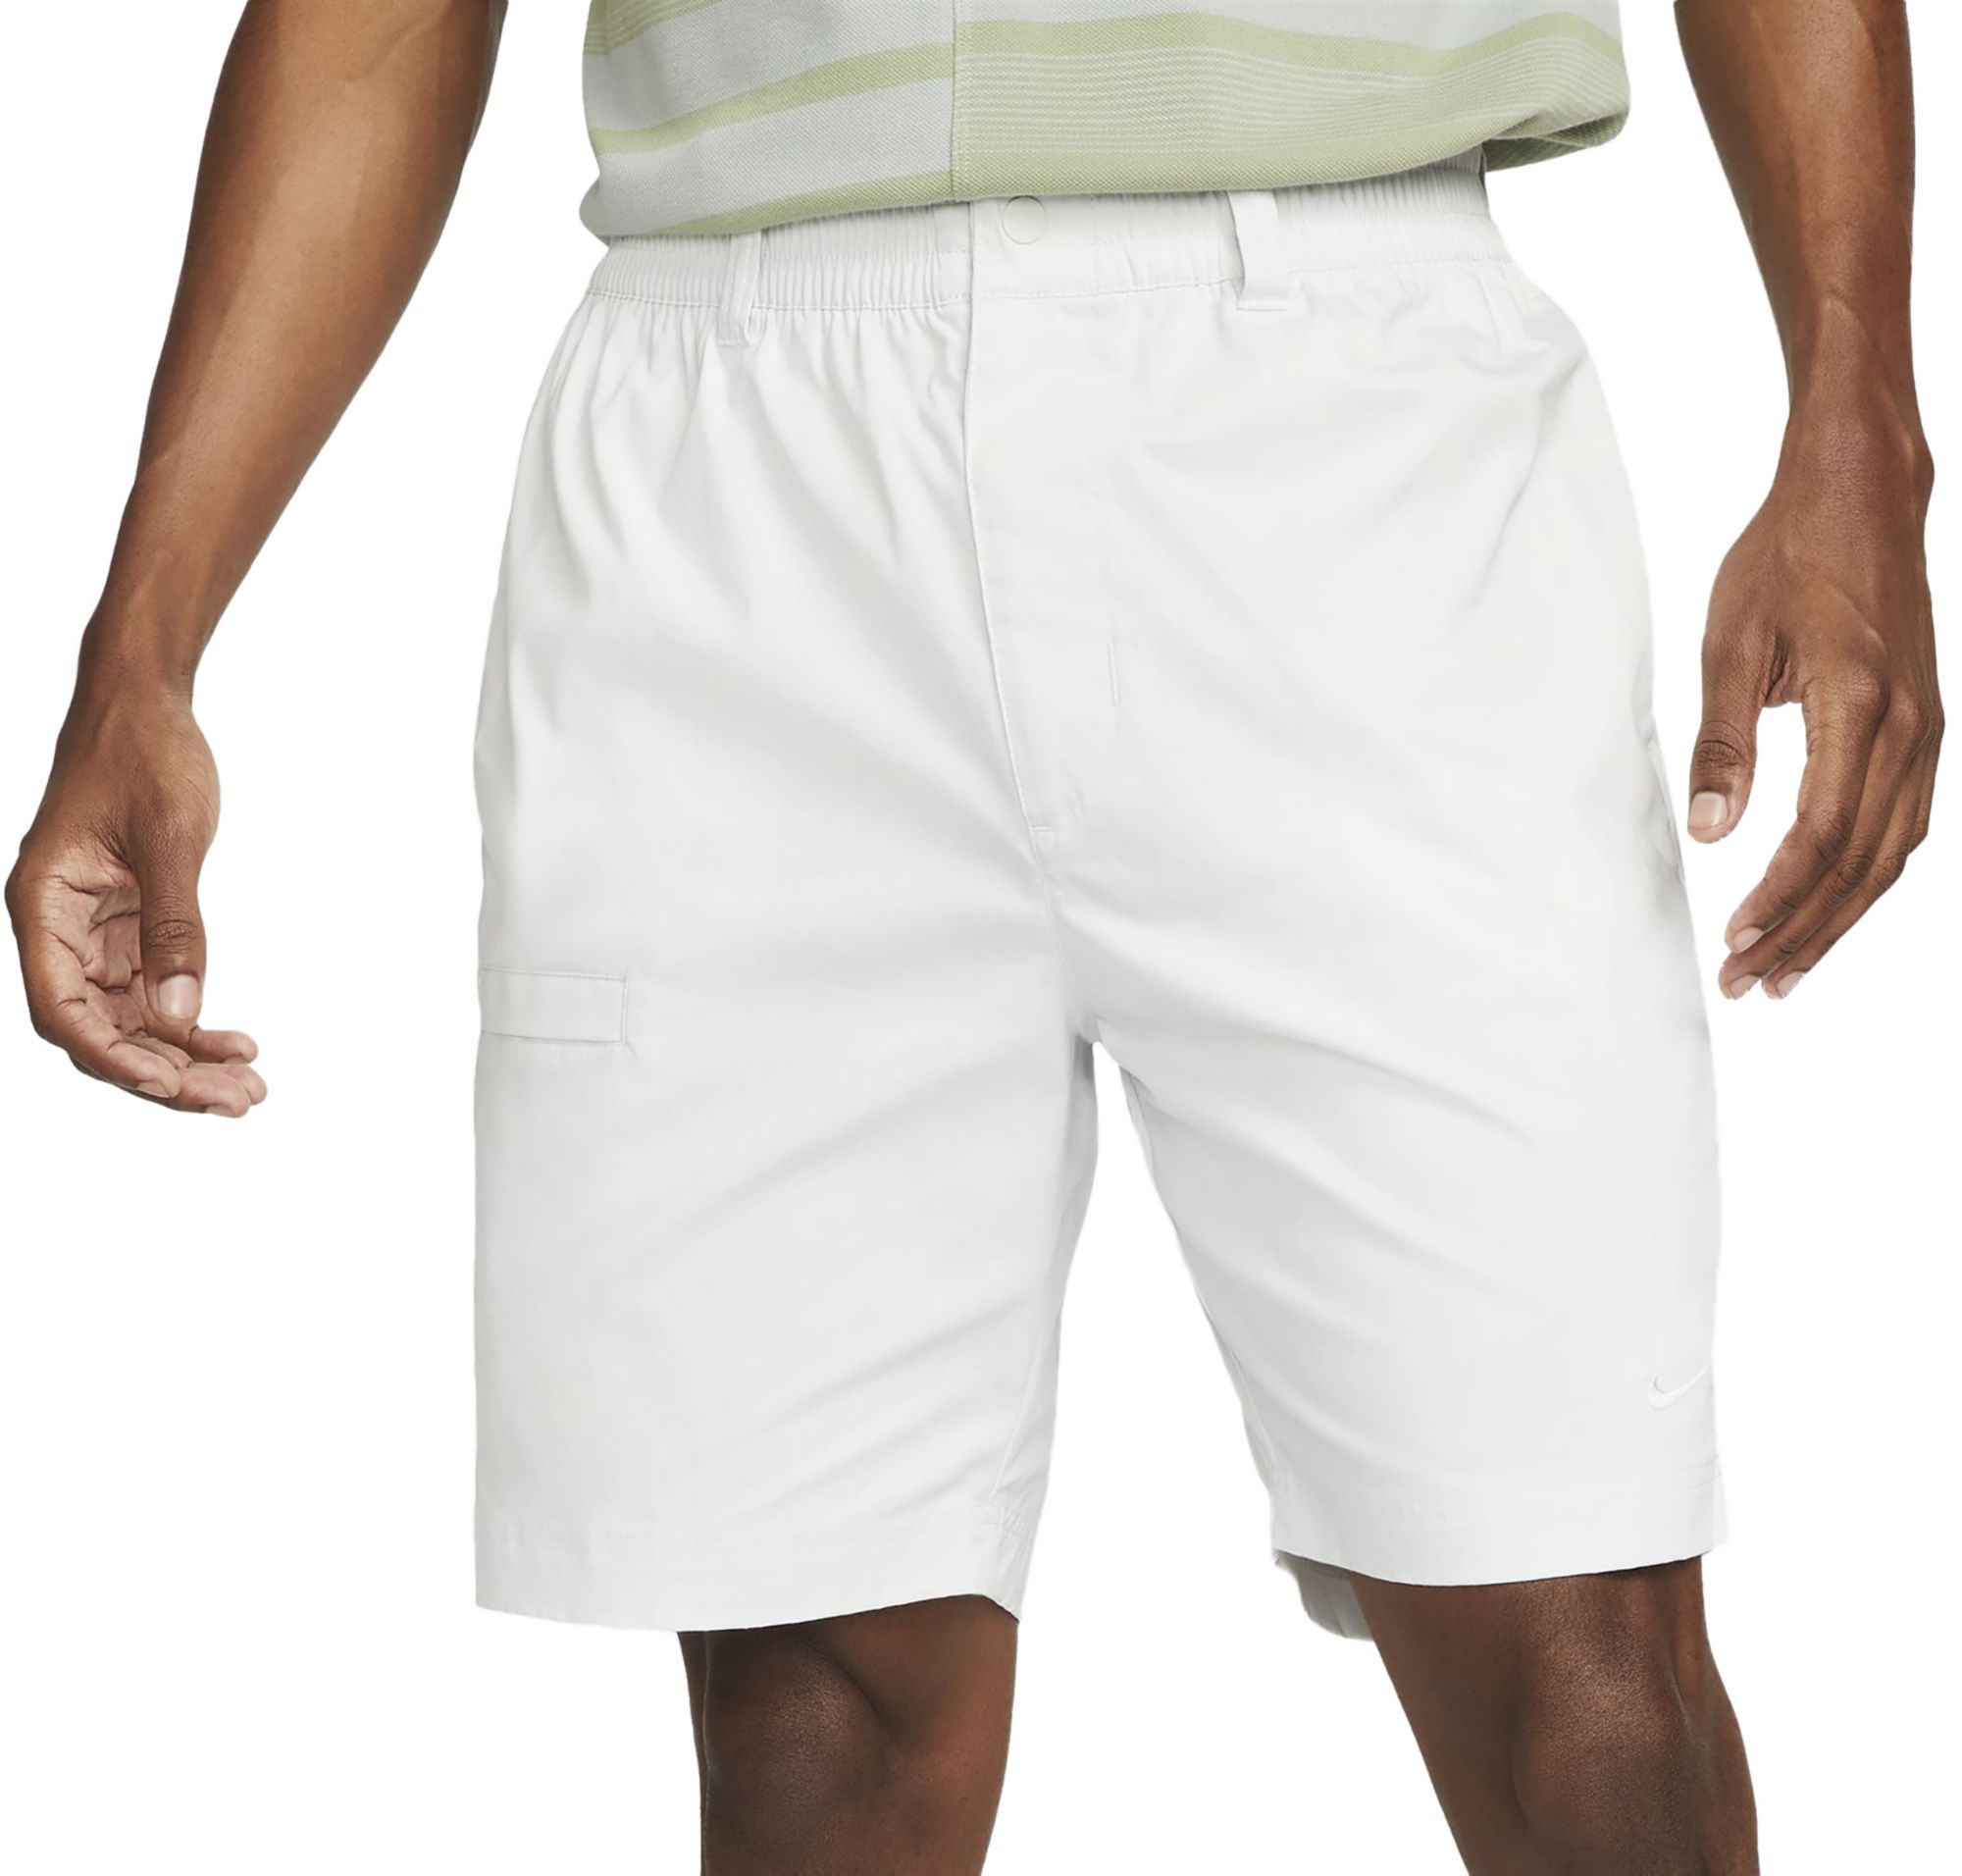 Nike Men's Unscripted Golf Shorts